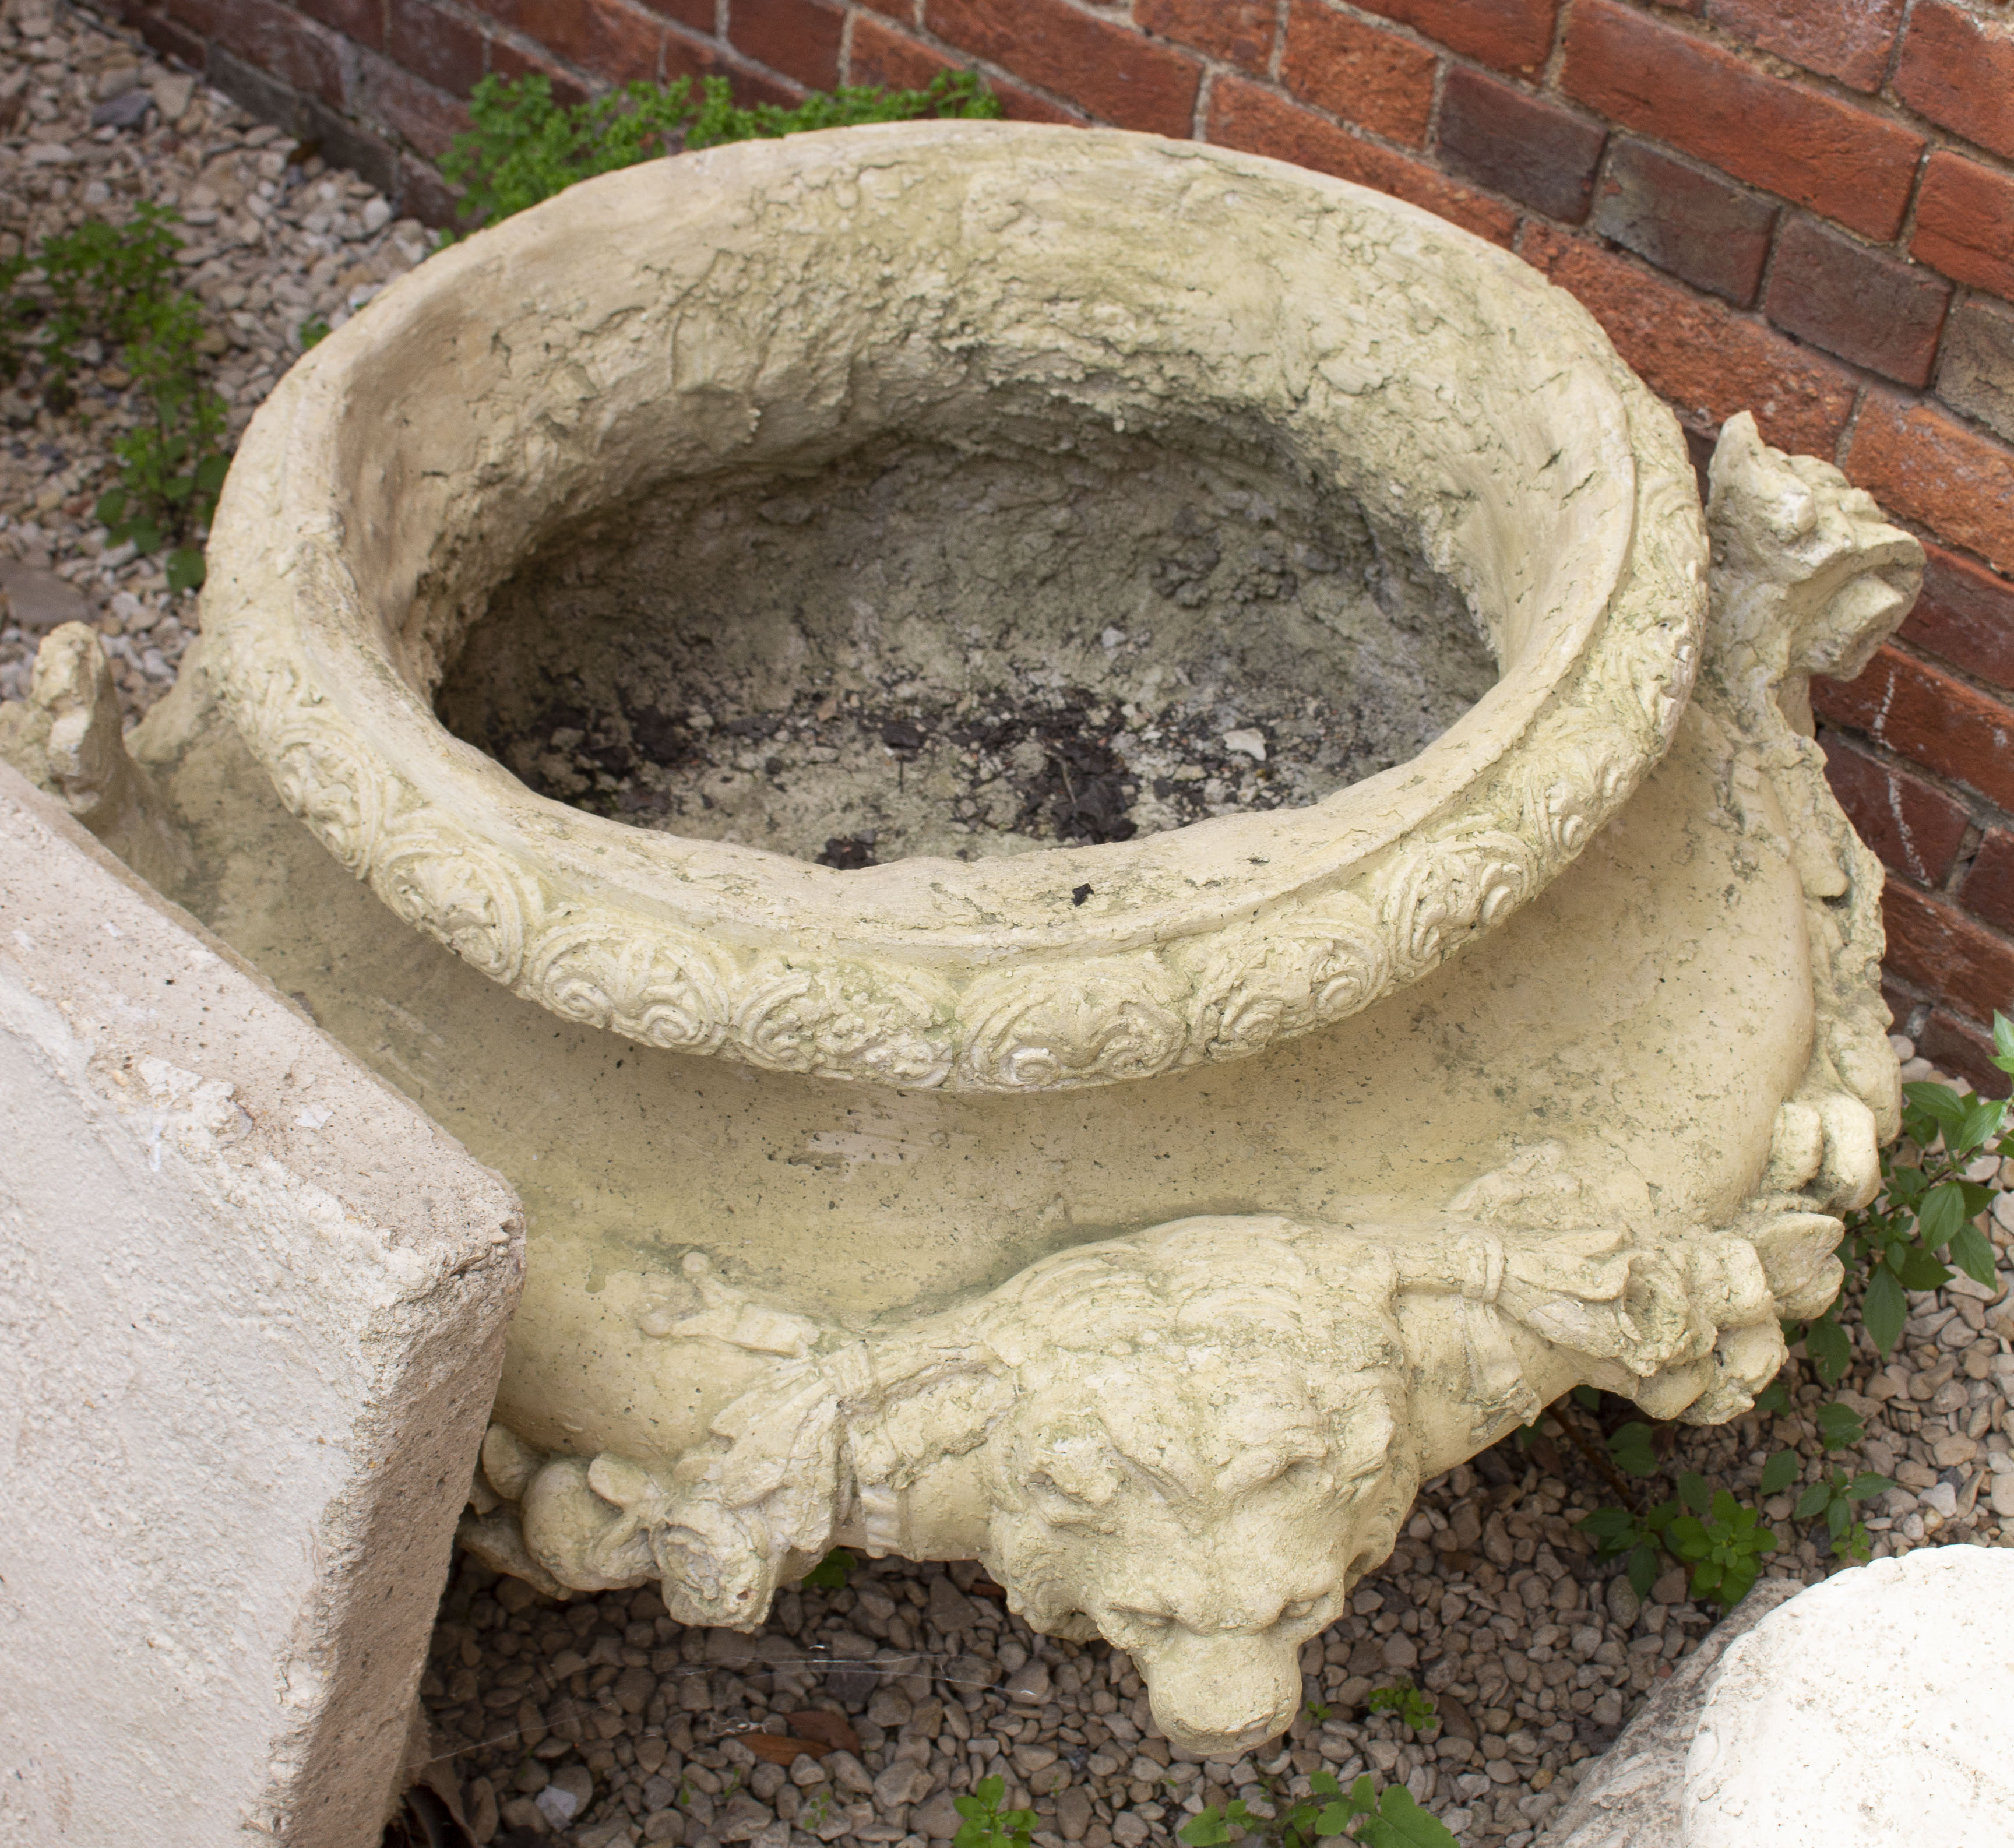 A LARGE CAST RECONSTITUTED STONE BAROQUE STYLE GARDEN URN decorated with lion masks and floral